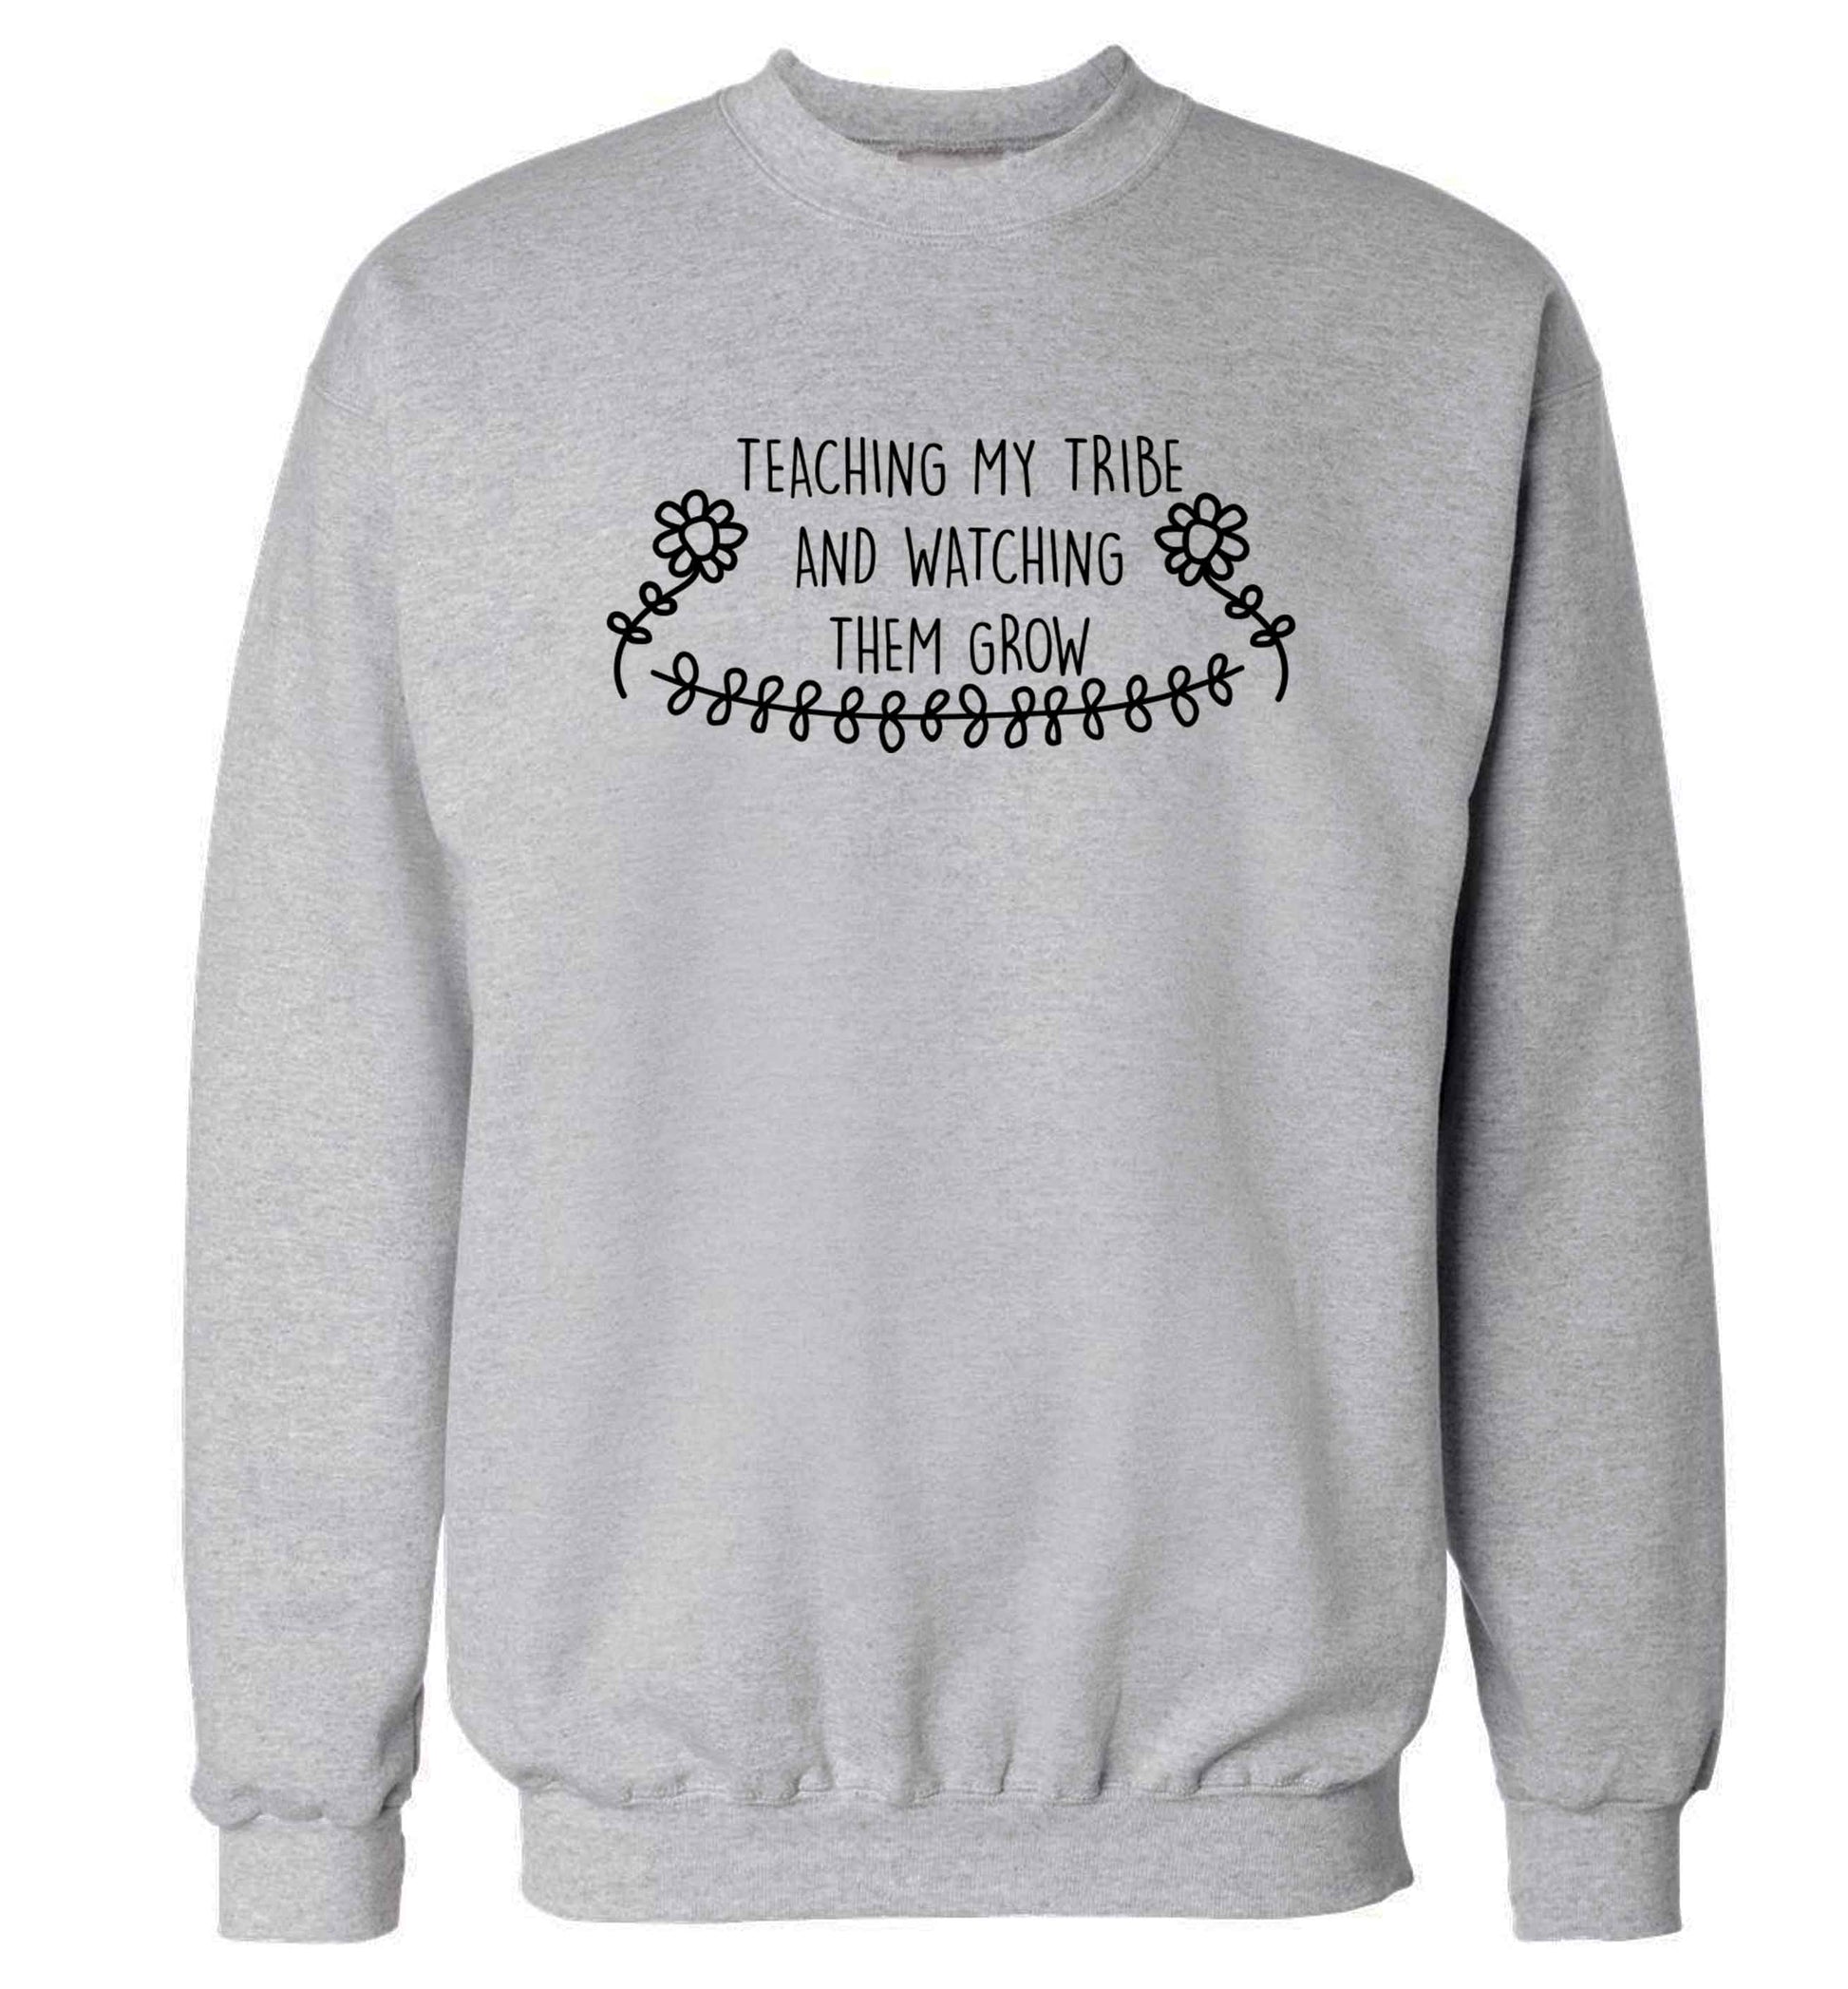 Teaching my tribe and watching them grow Adult's unisex grey Sweater 2XL